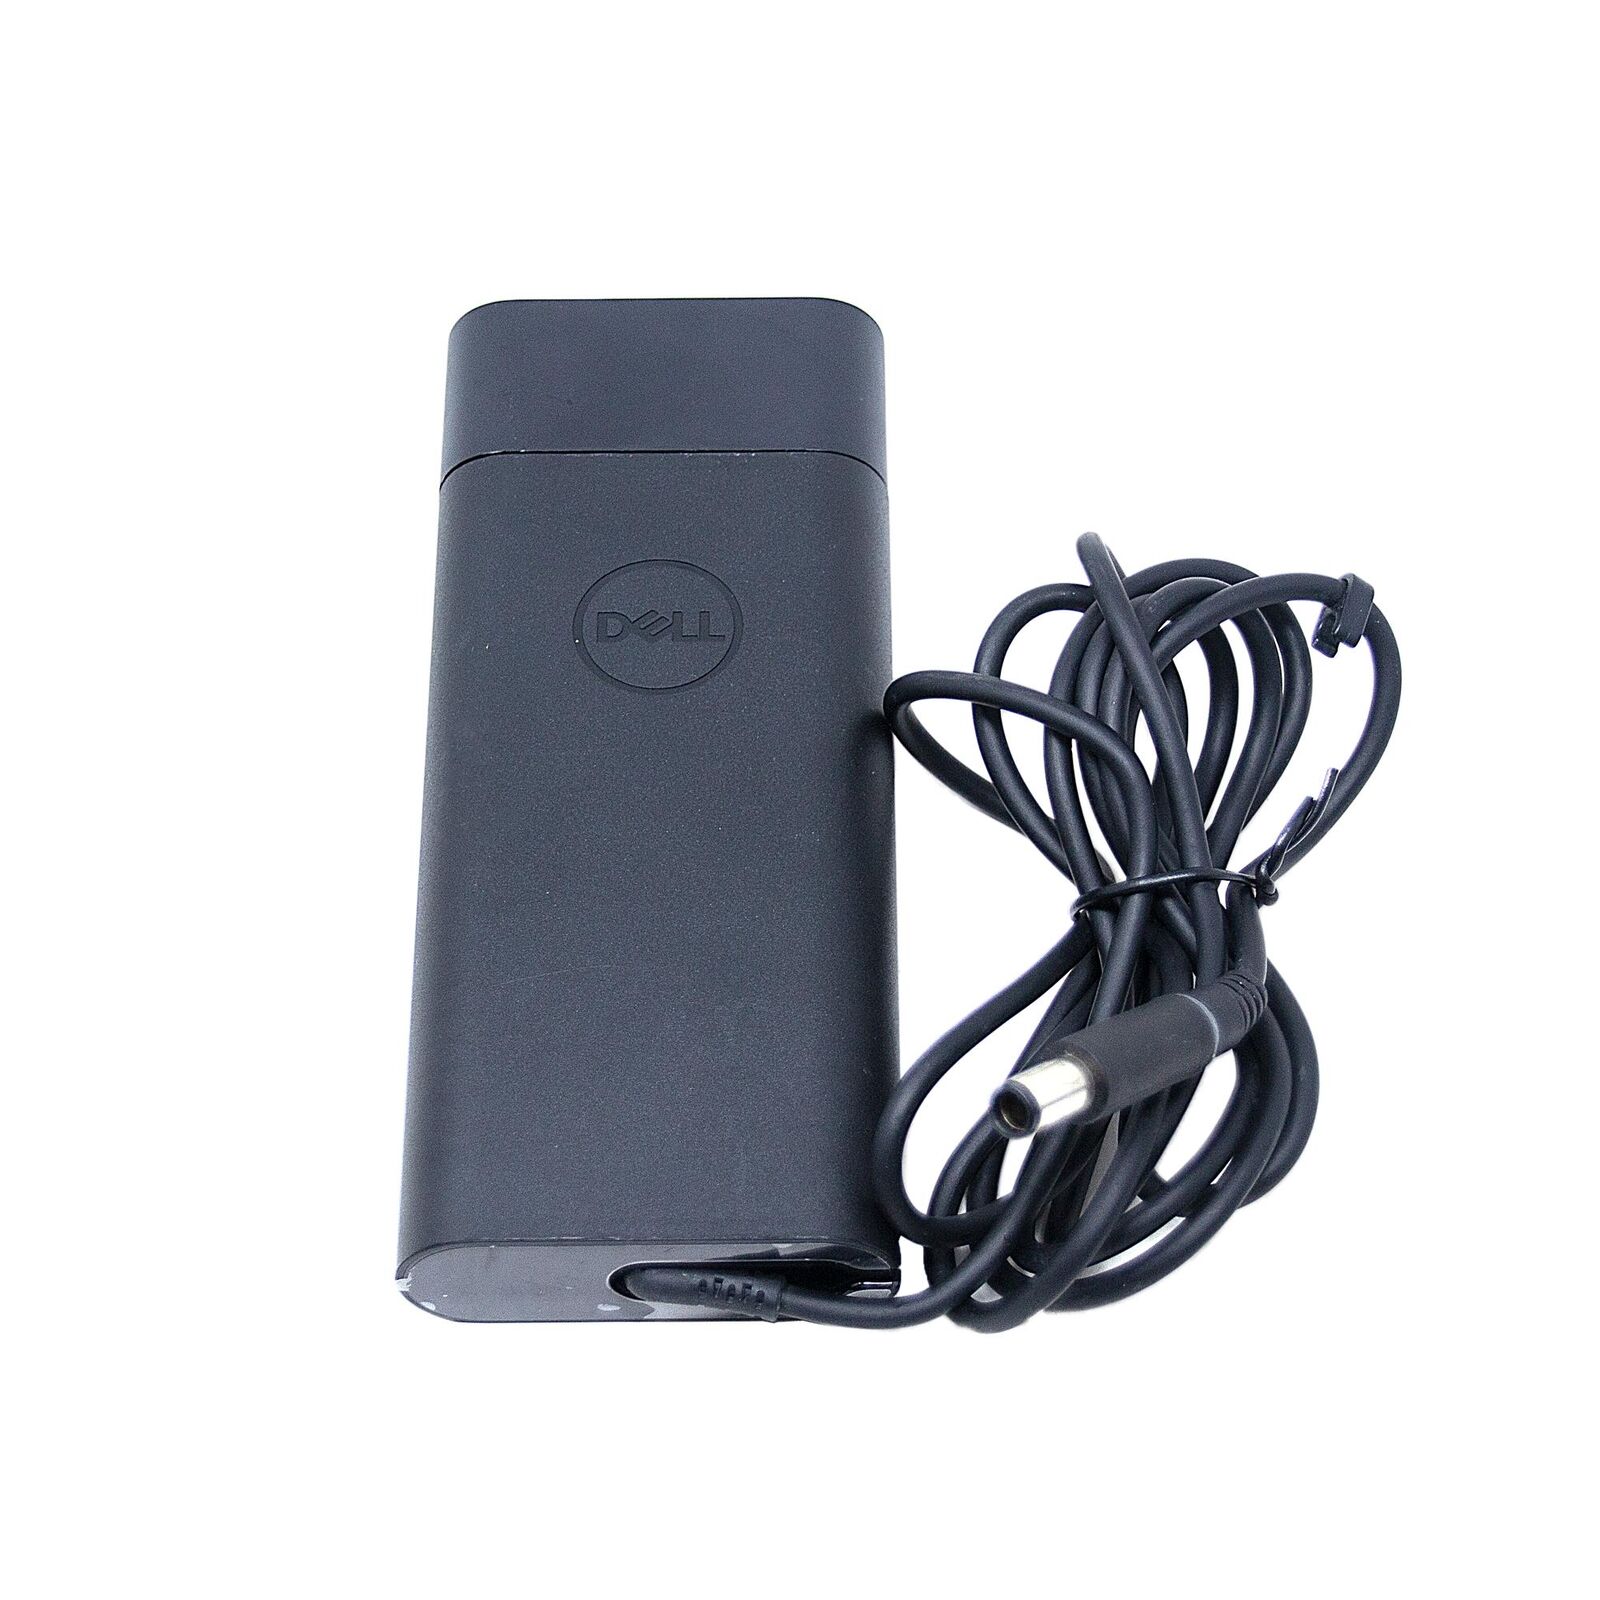 DELL ADP-90AH C 19.5V 4.62A 90W Genuine Original AC Power Adapter Charger